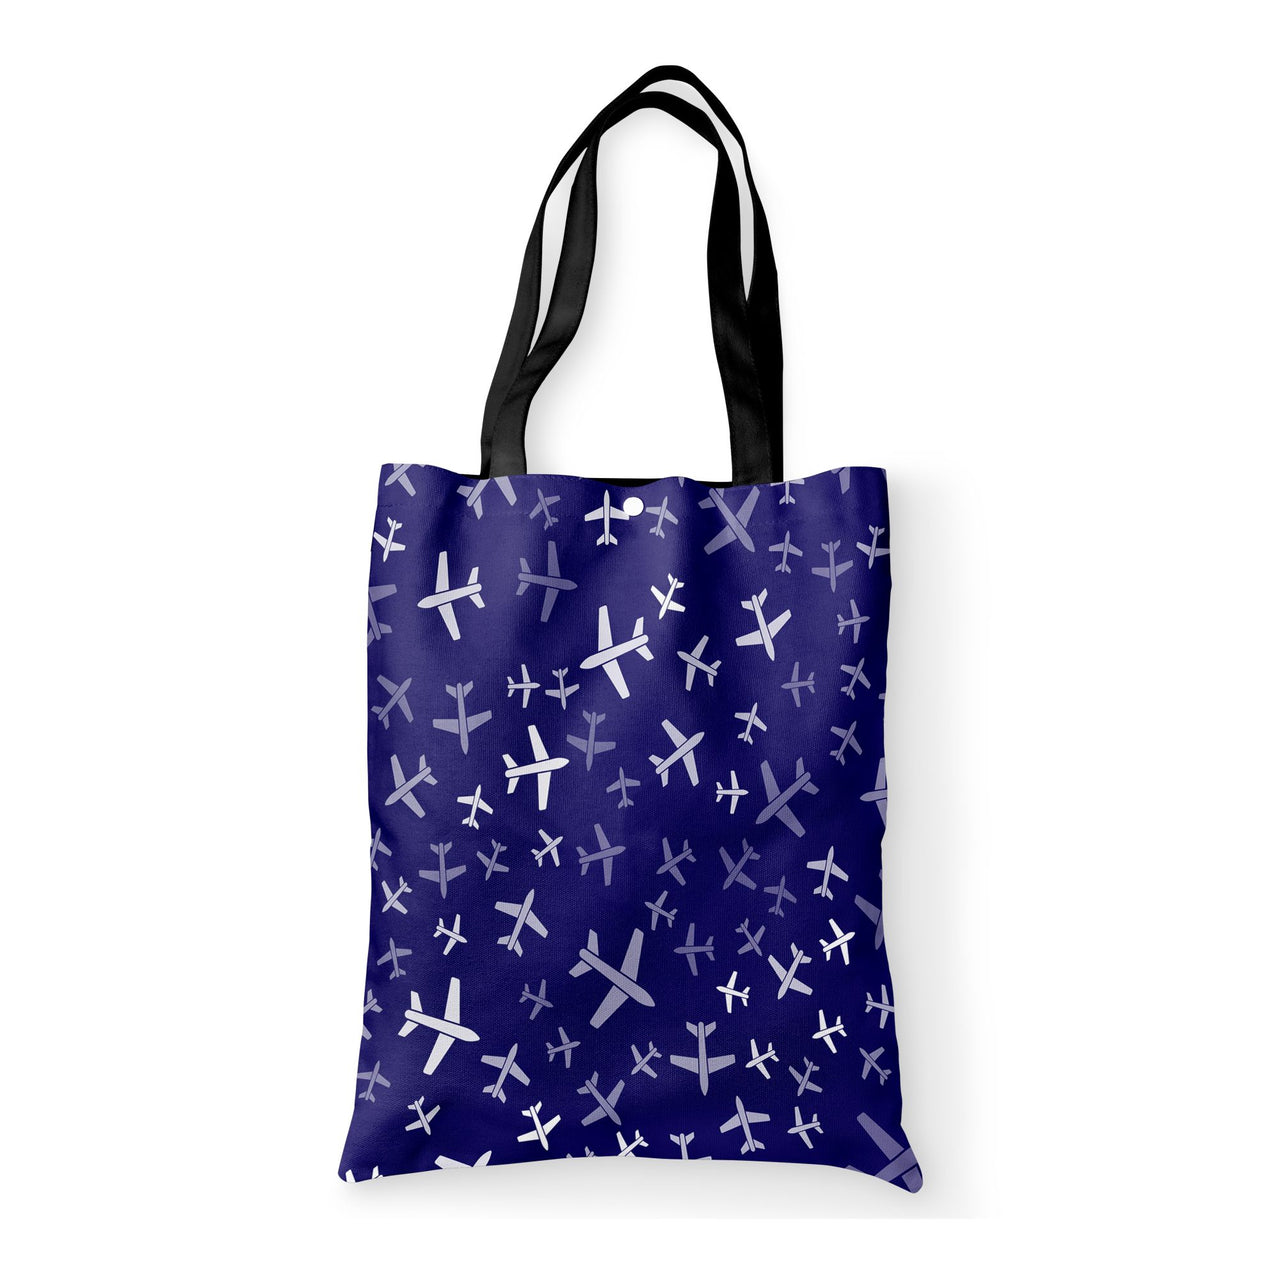 Different Sizes Seamless Airplanes Designed Tote Bags